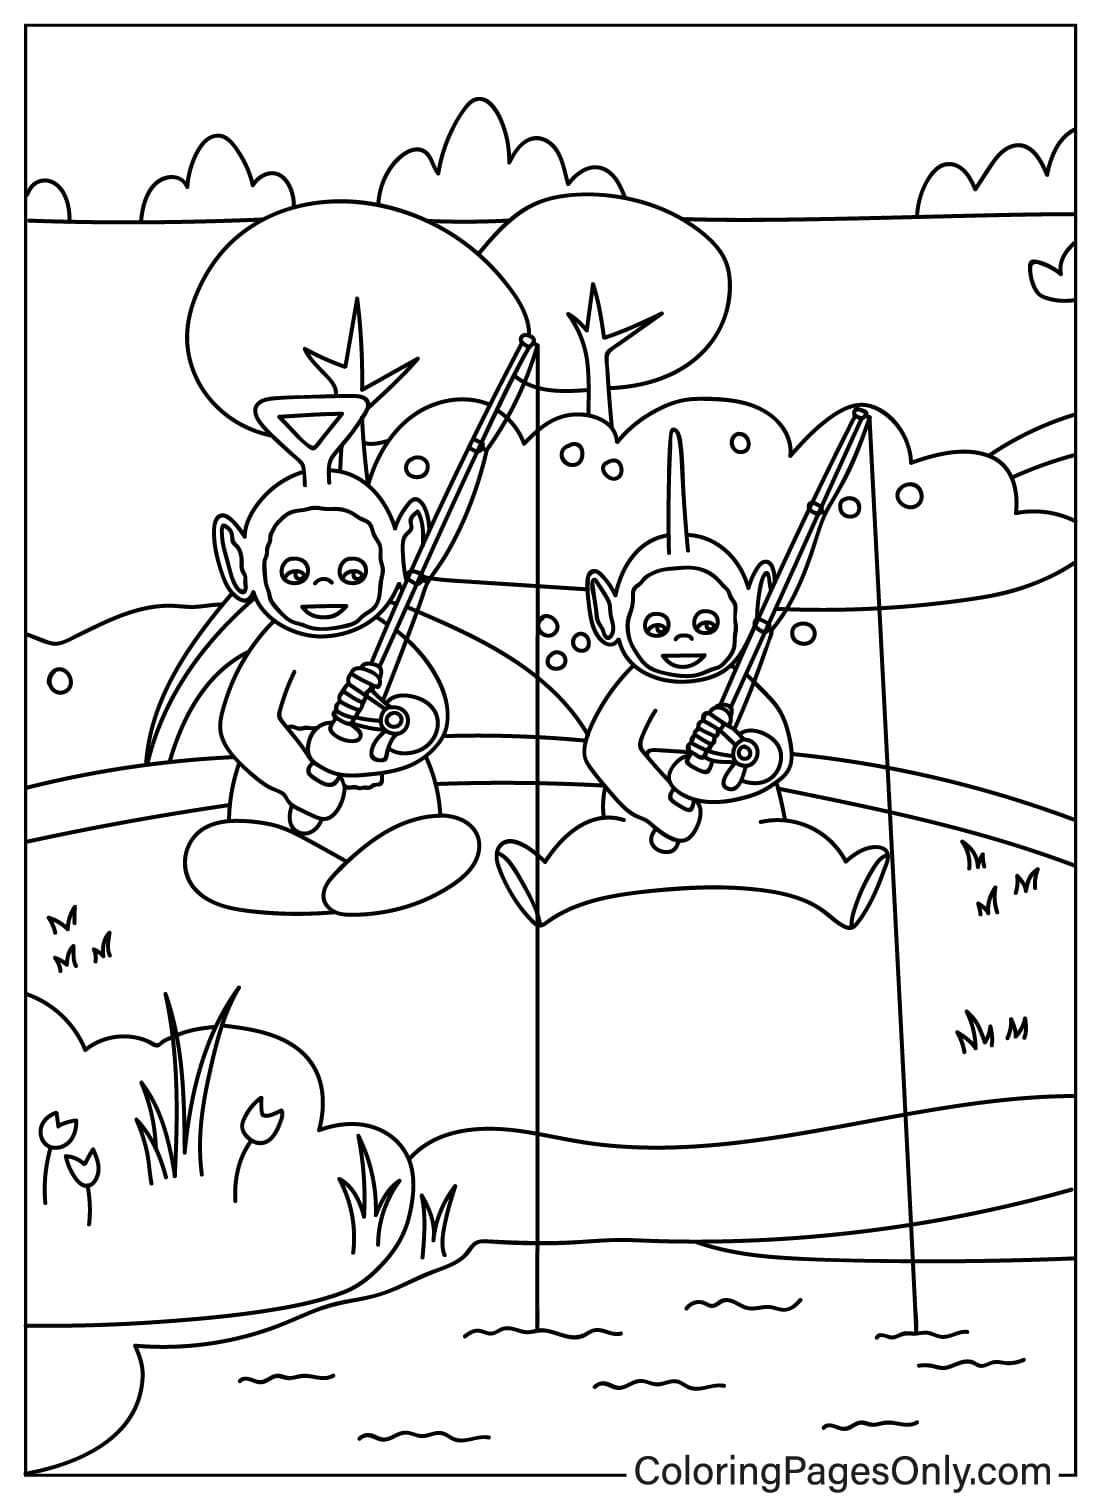 Teletubbies – WildBrain Coloring Pages to for Kids from Teletubbies - WildBrain